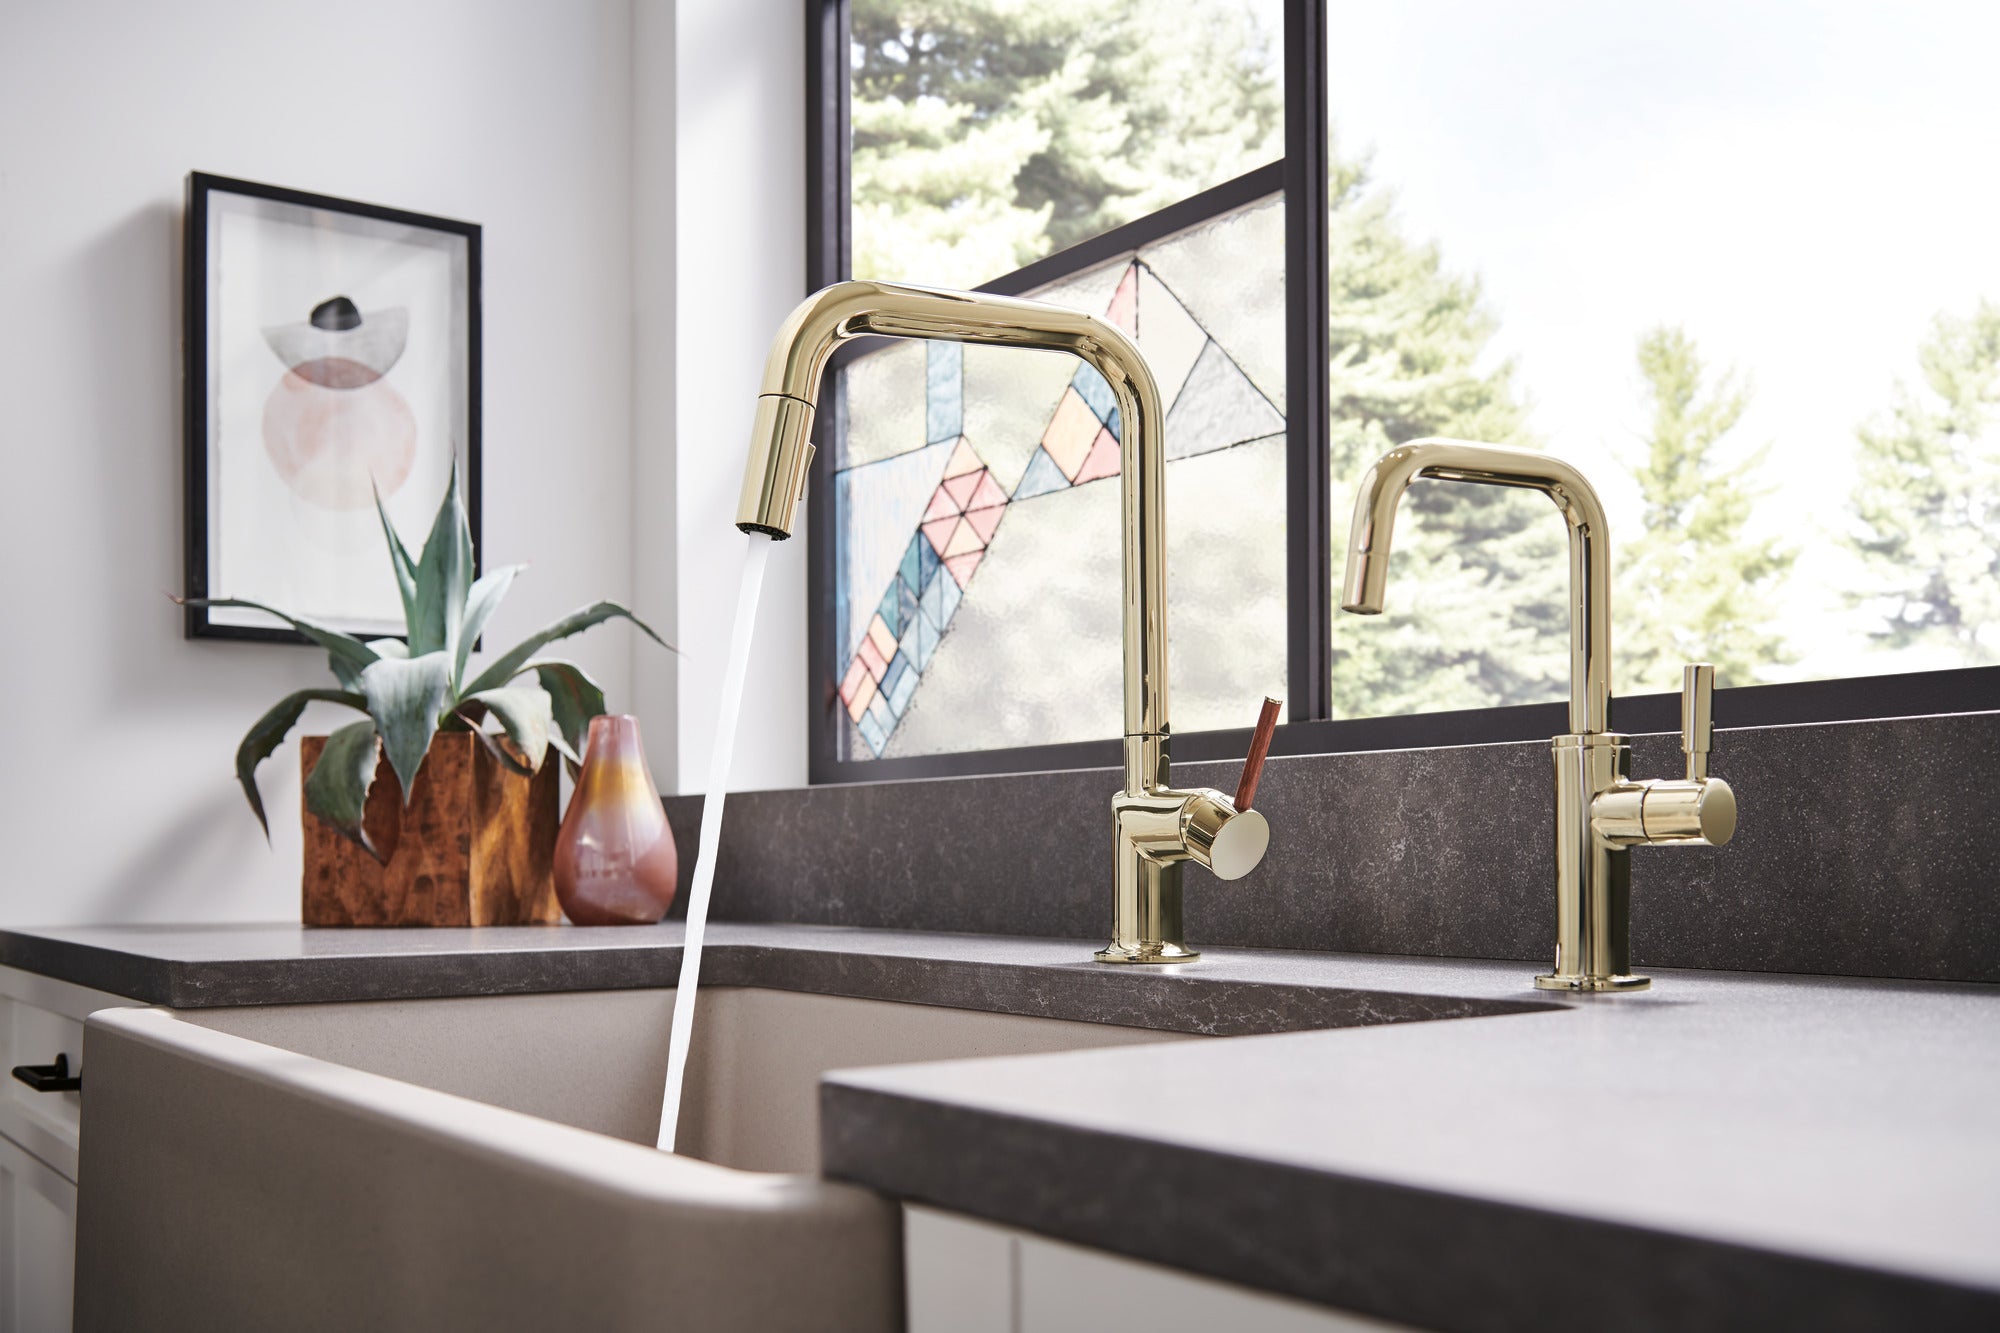 polished nickel pull-down faucet